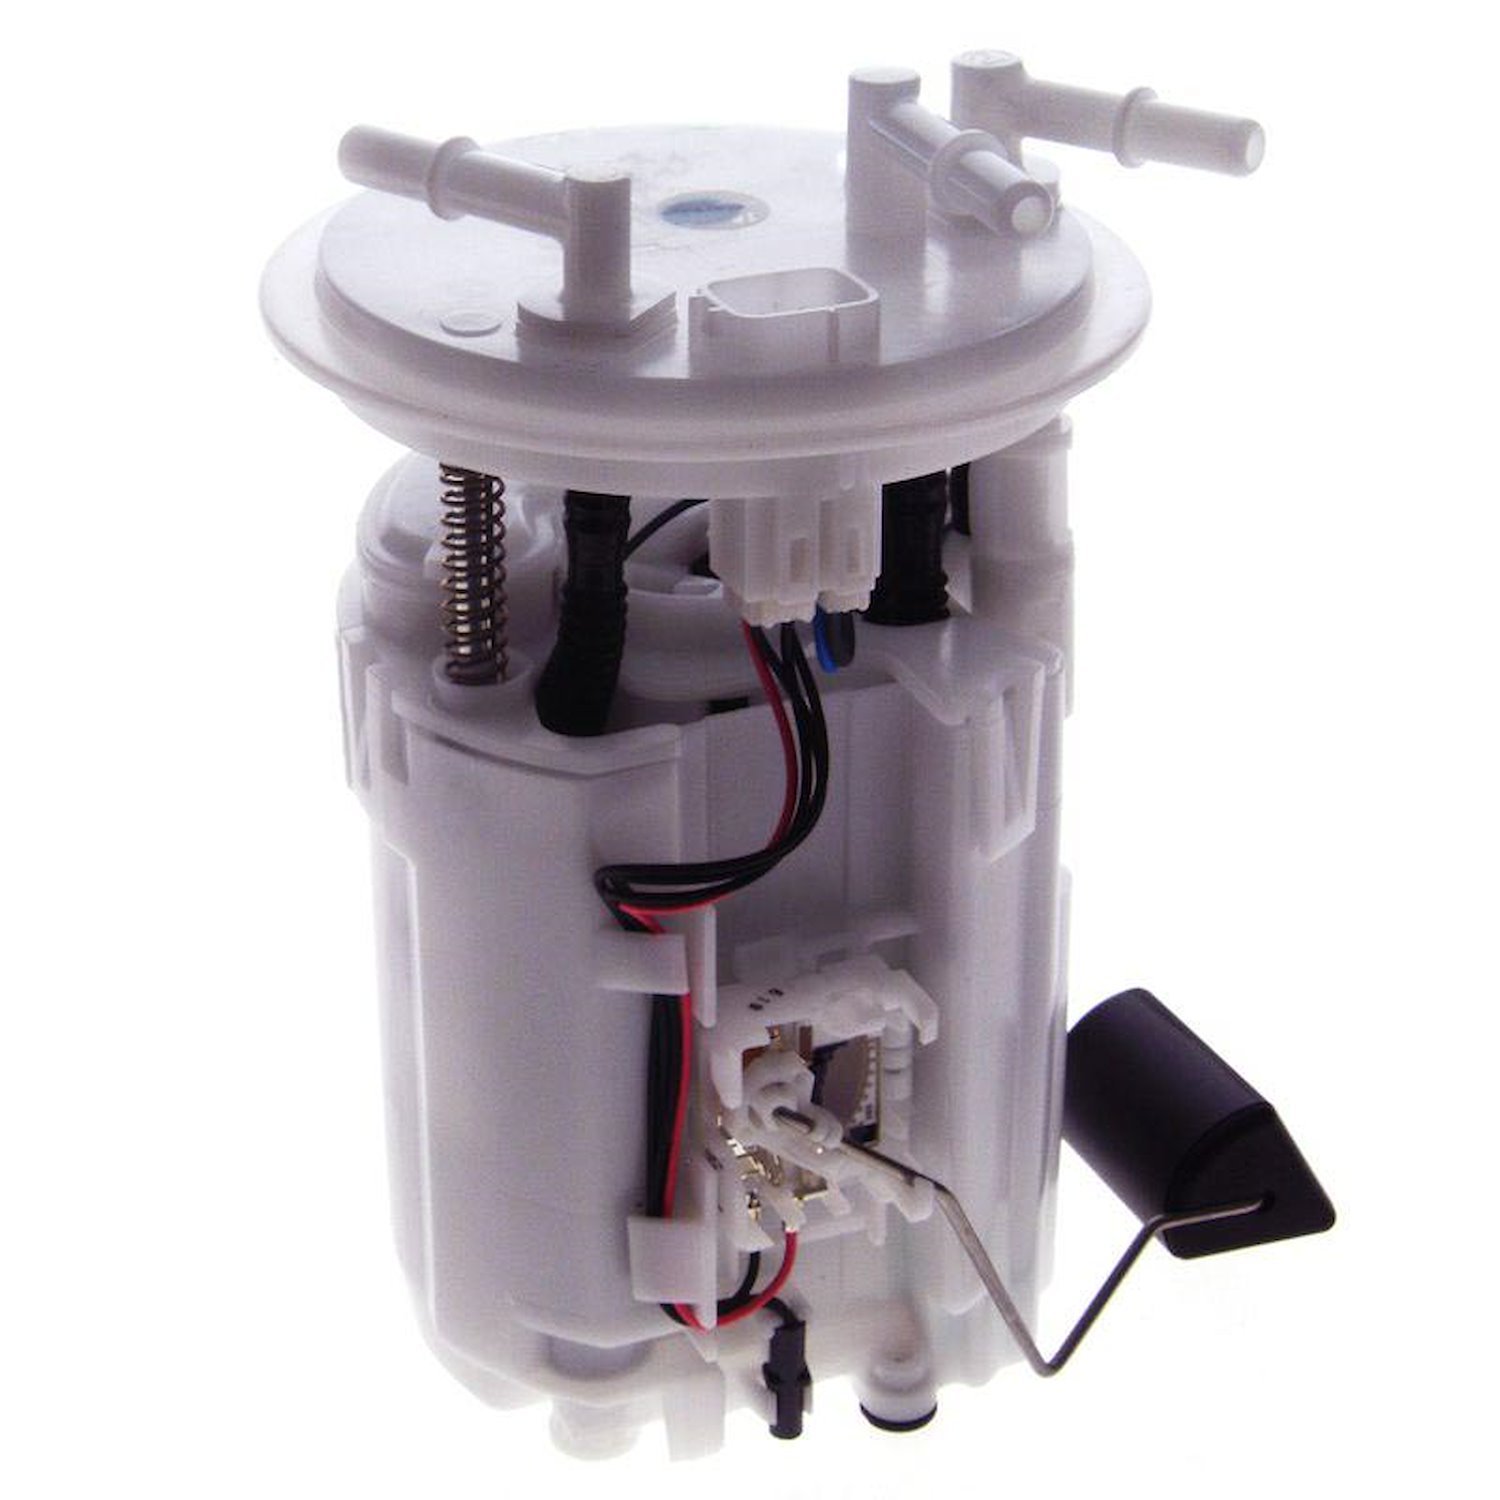 OE Replacement Fuel Pump Module Assembly for 2005-2009 Subaru Outback/2008-2009 Subaru Legacy